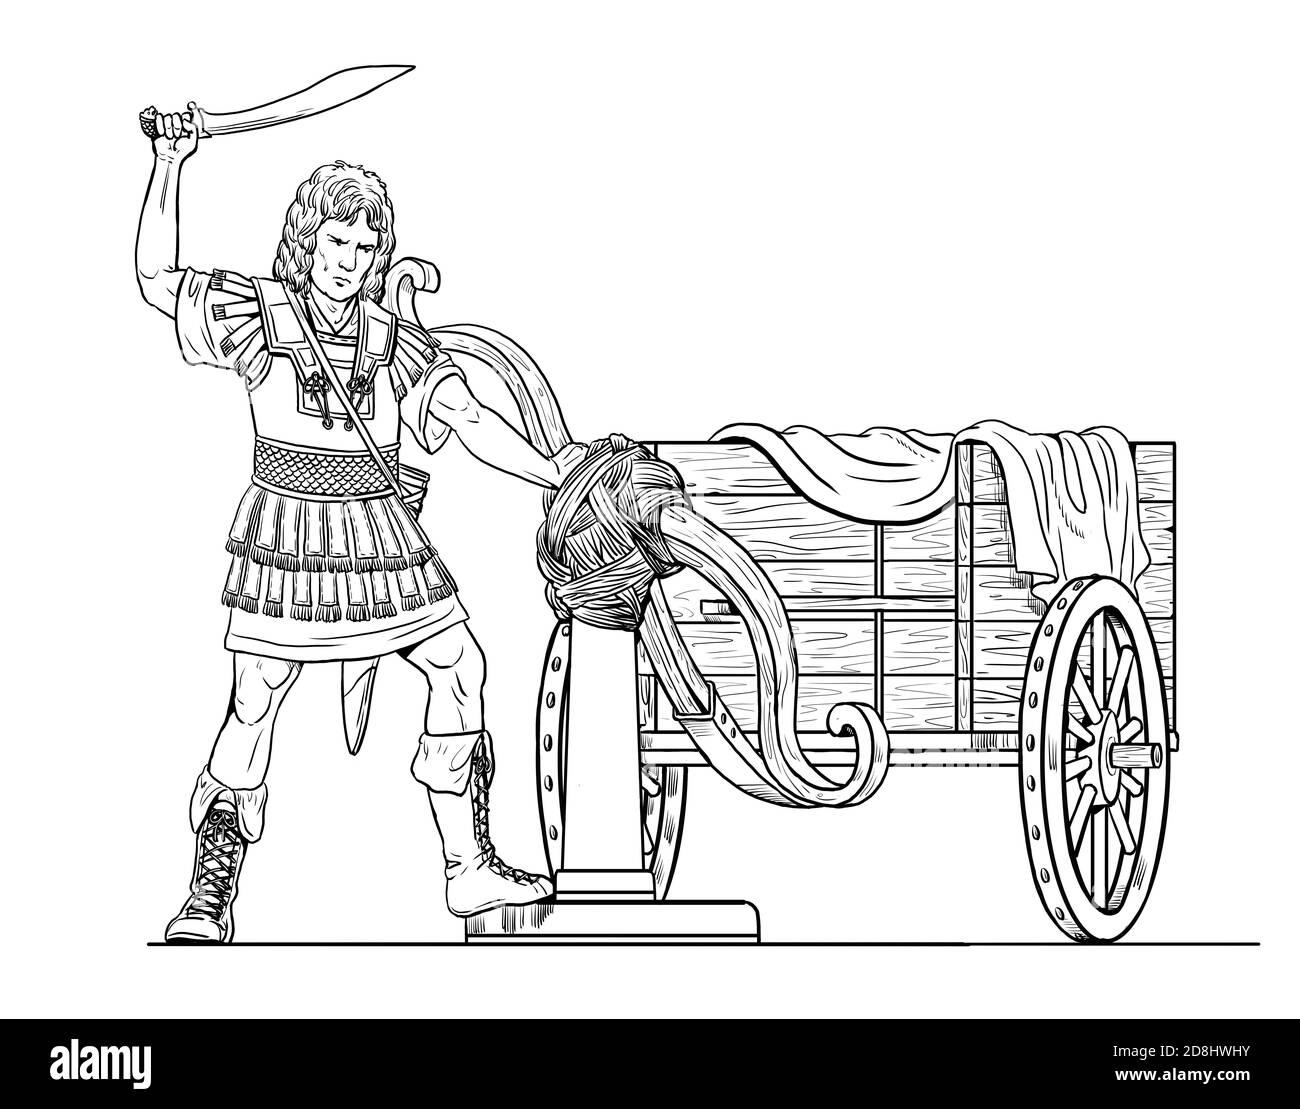 Alexander the Great cutting the Gordian Knot. Historical drawing. Stock Photo